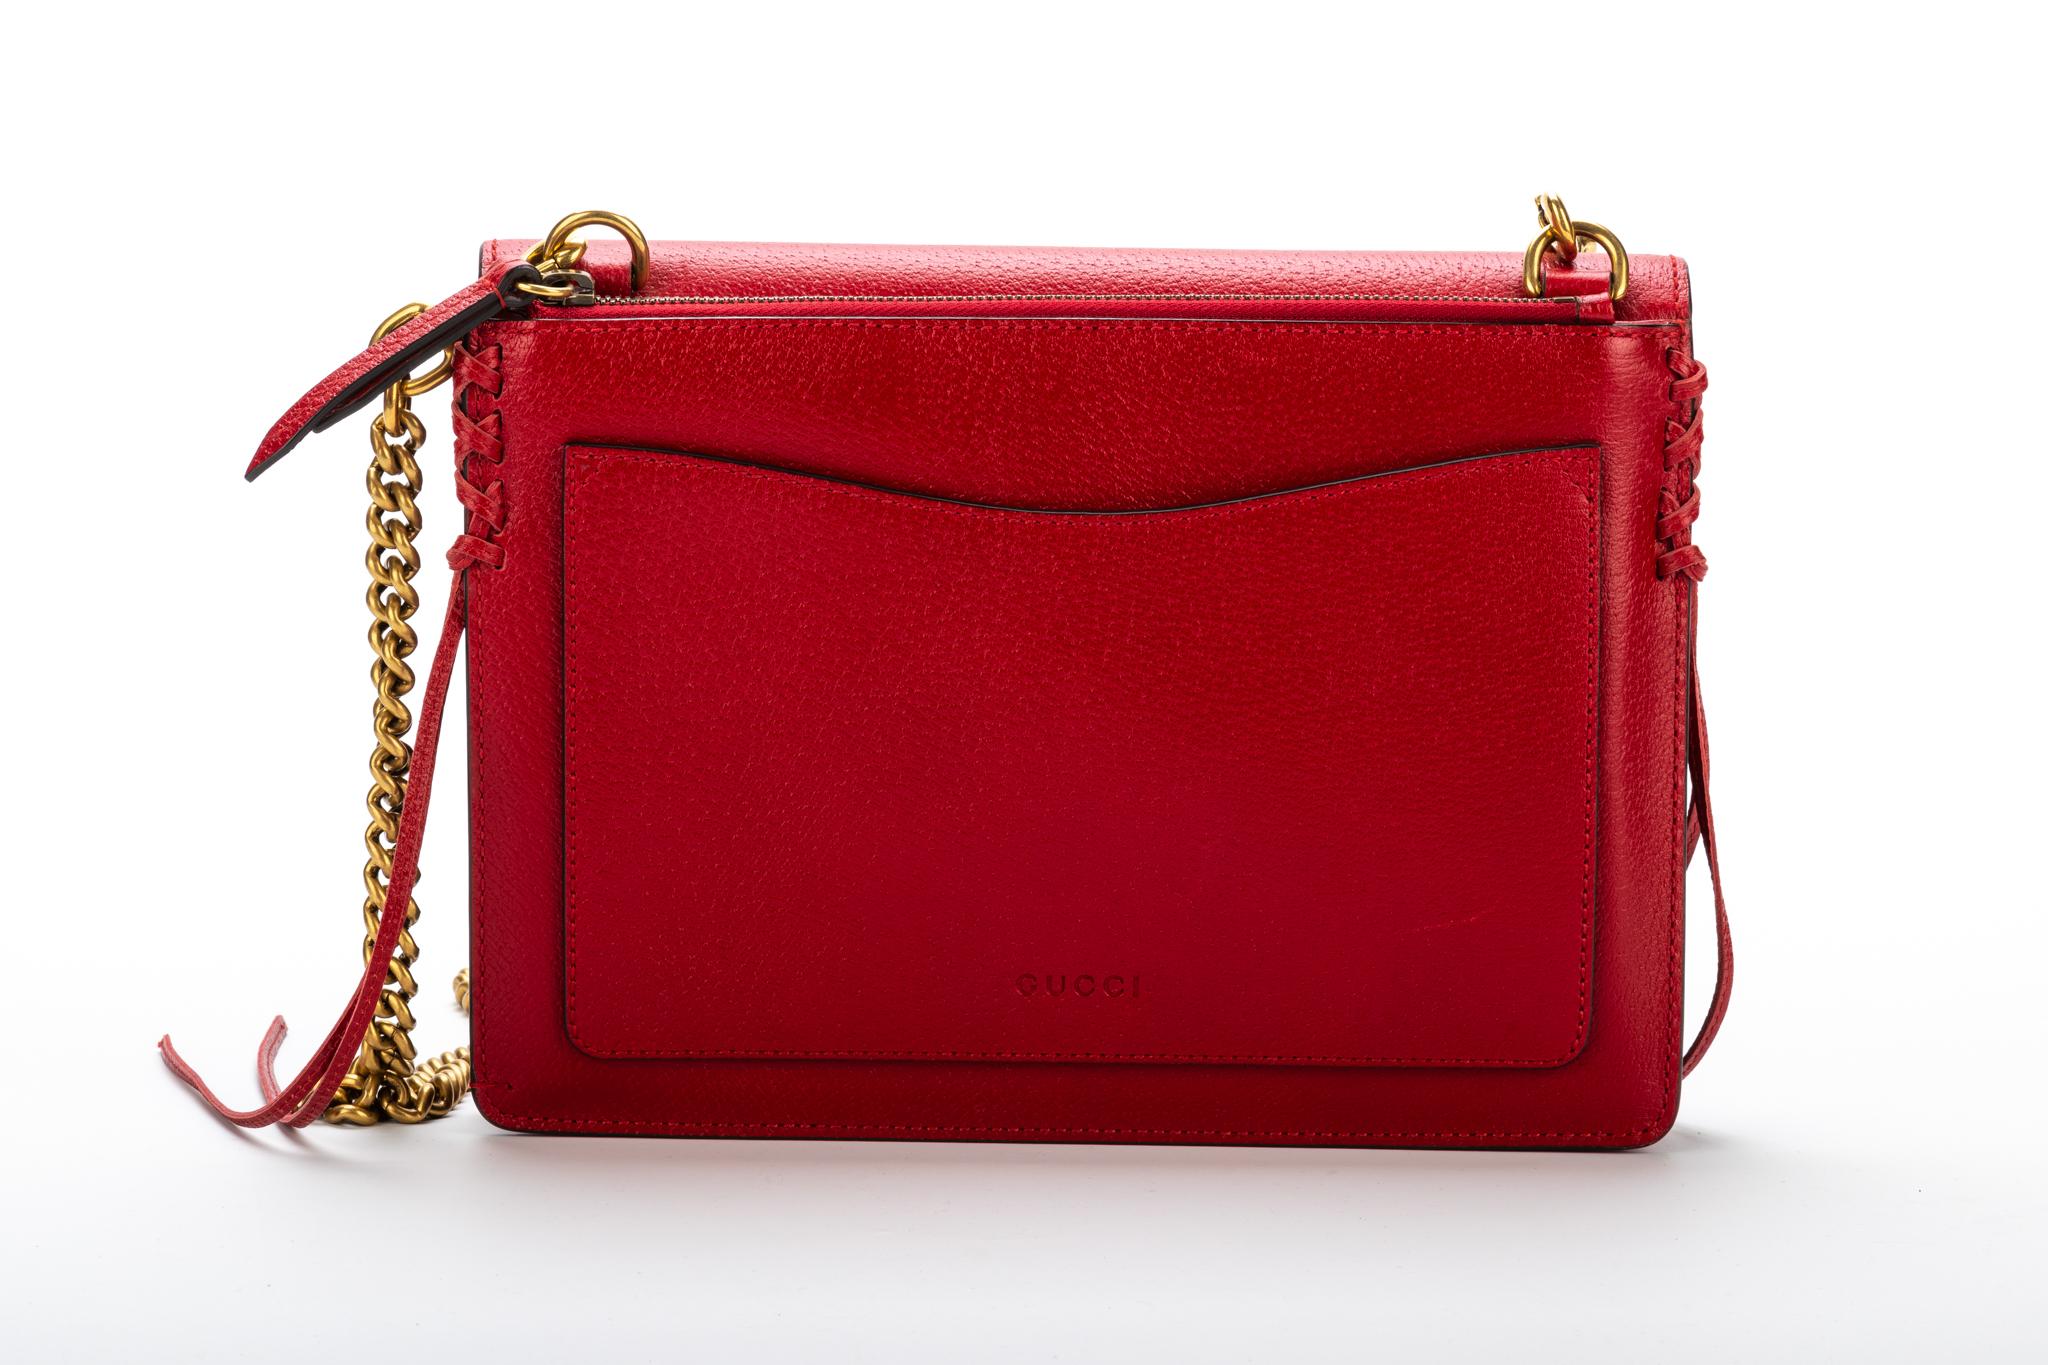 Women's Gucci Red Leather Cross Body Bag